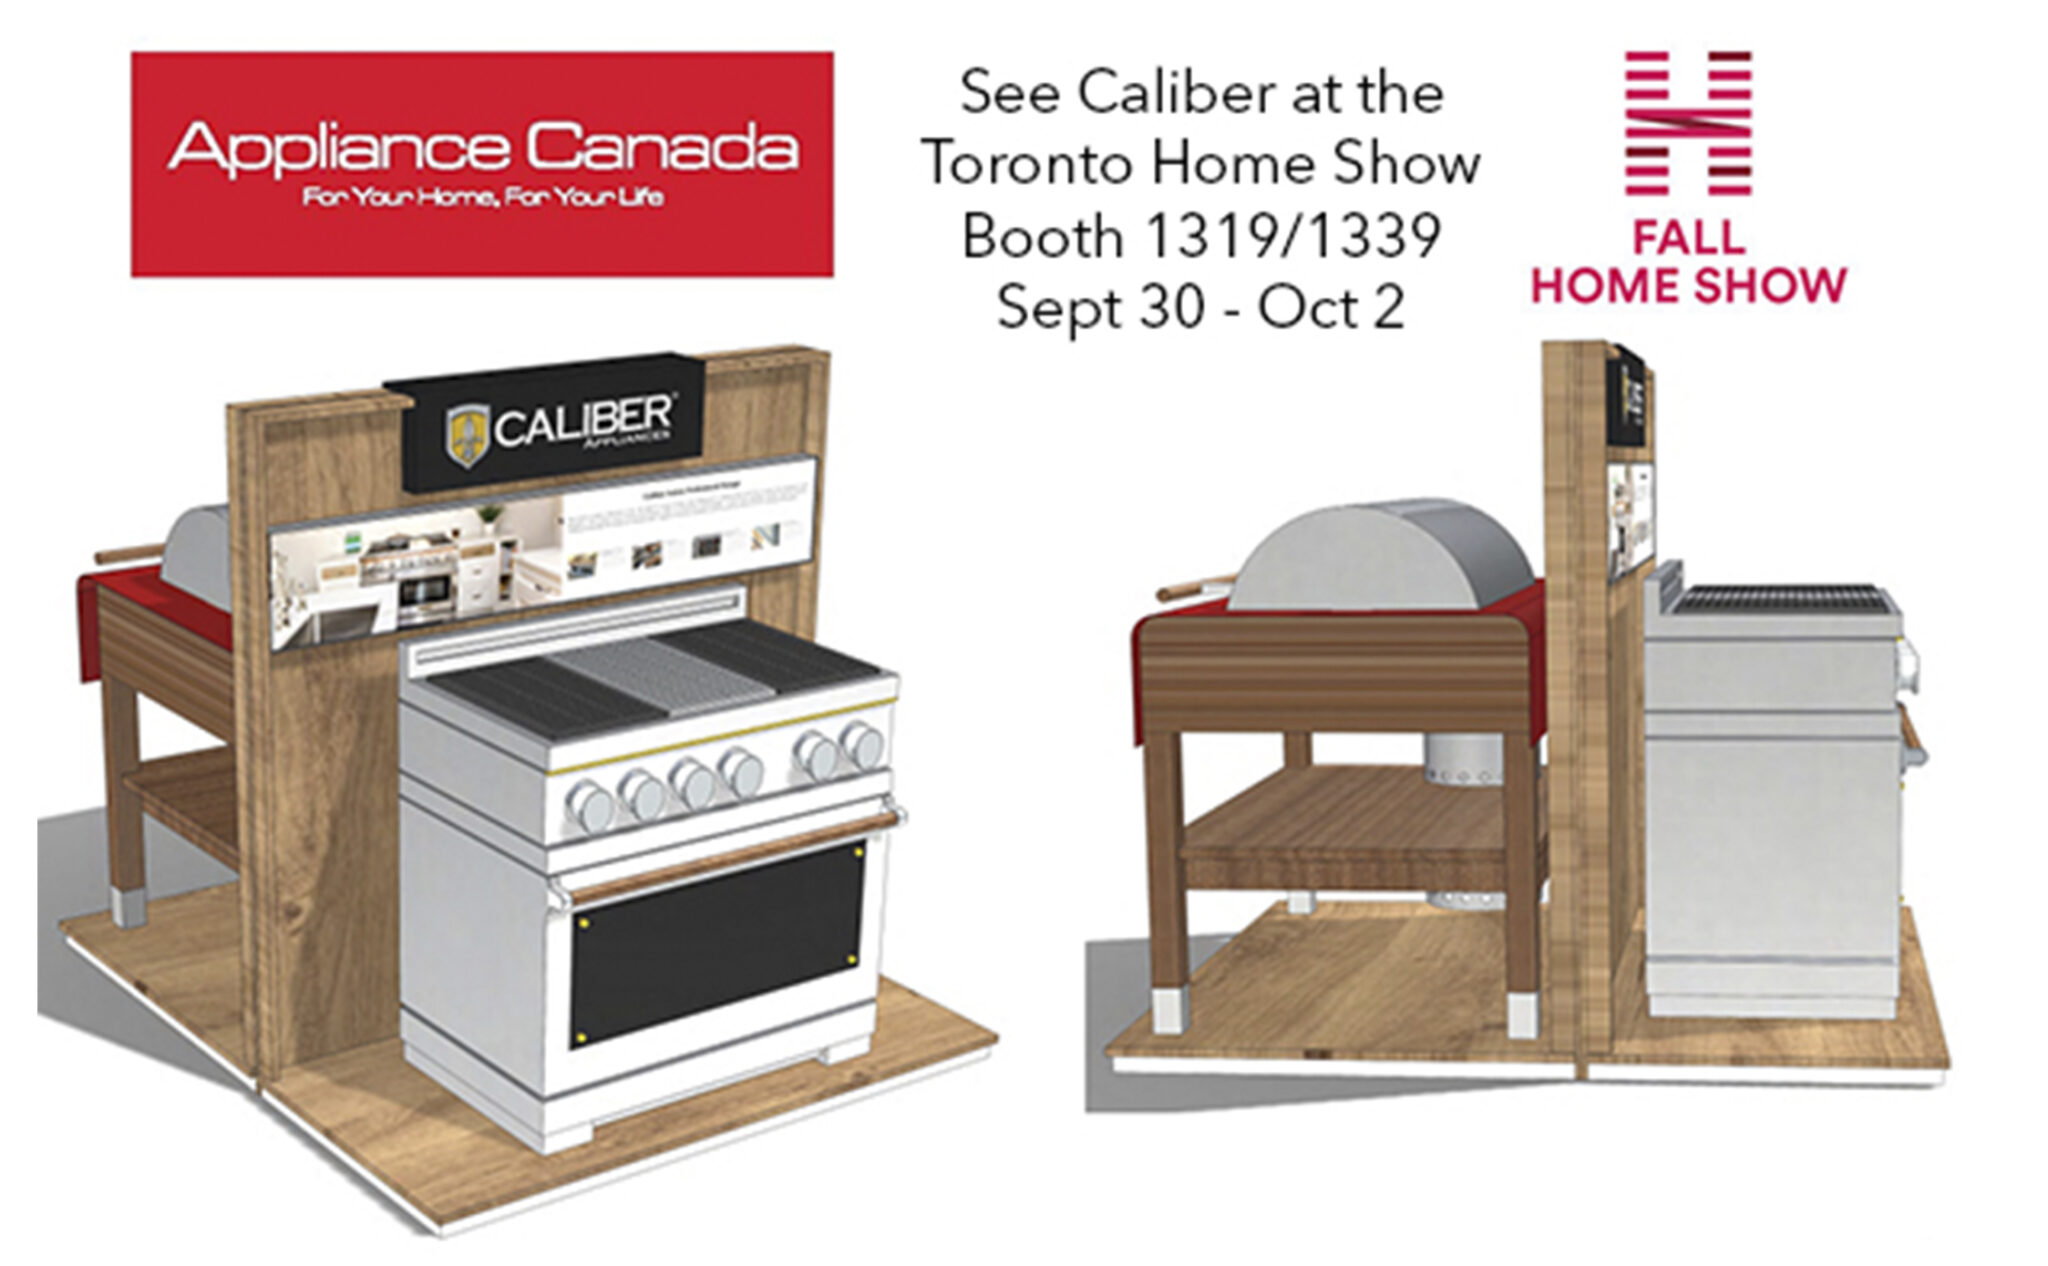 Appliance Canada featuring Caliber at the Toronto Home Show